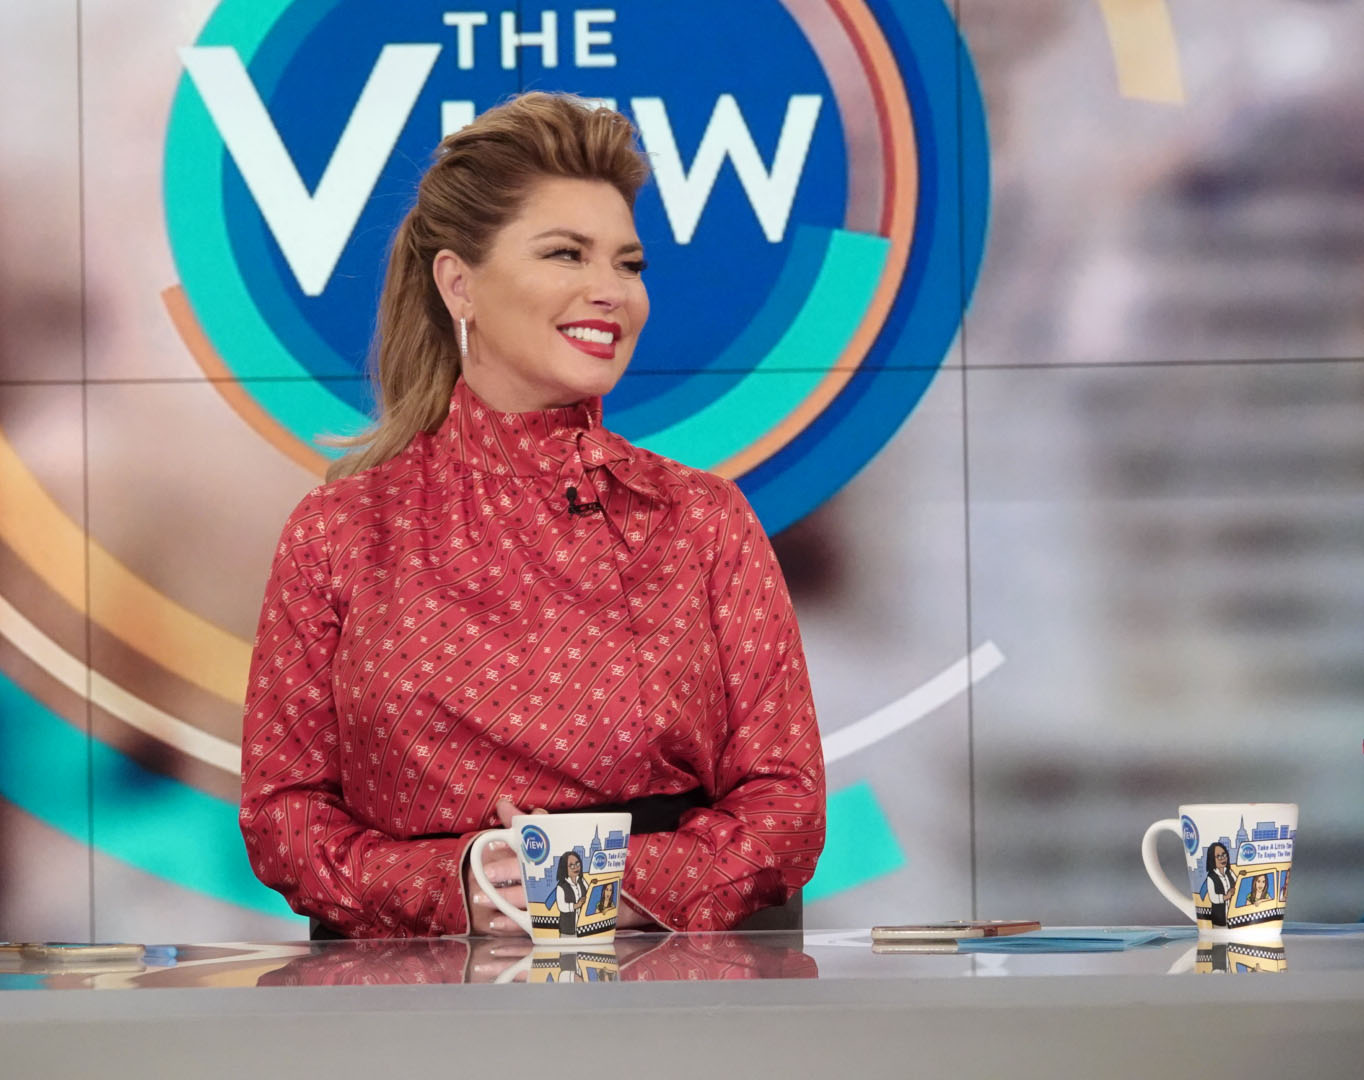 PHOTO: Shania Twain discusses her Las Vegas residency and new film "I Still Believe" on "The View," Feb. 7, 2020.